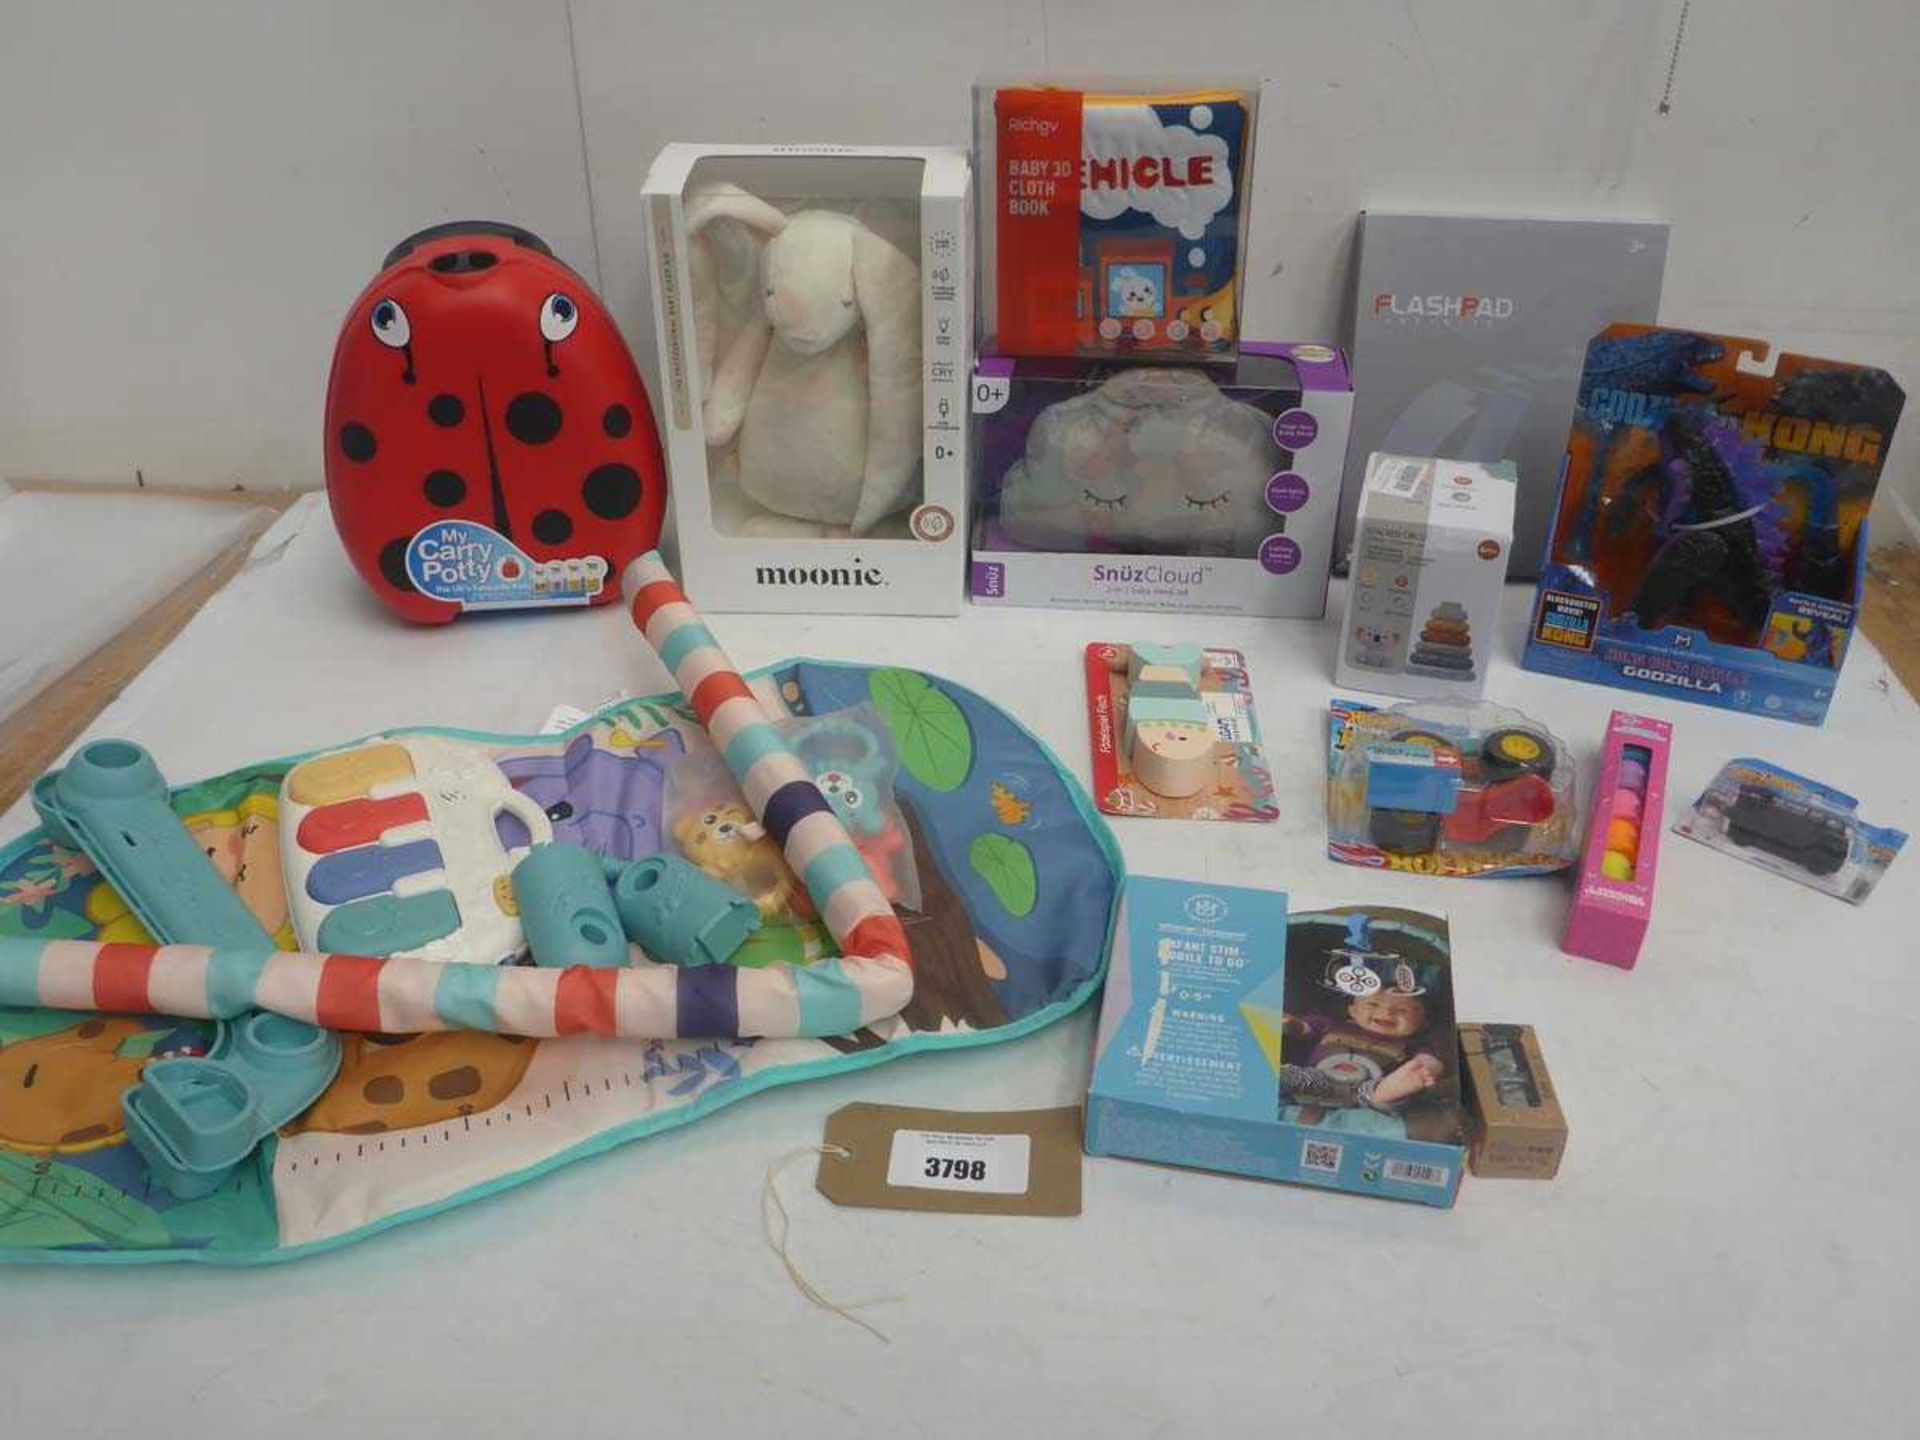 +VAT Moonie baby sleep aid, Snuz Cloud, My Carry Potty, Flash Pad Infinite, and other toys